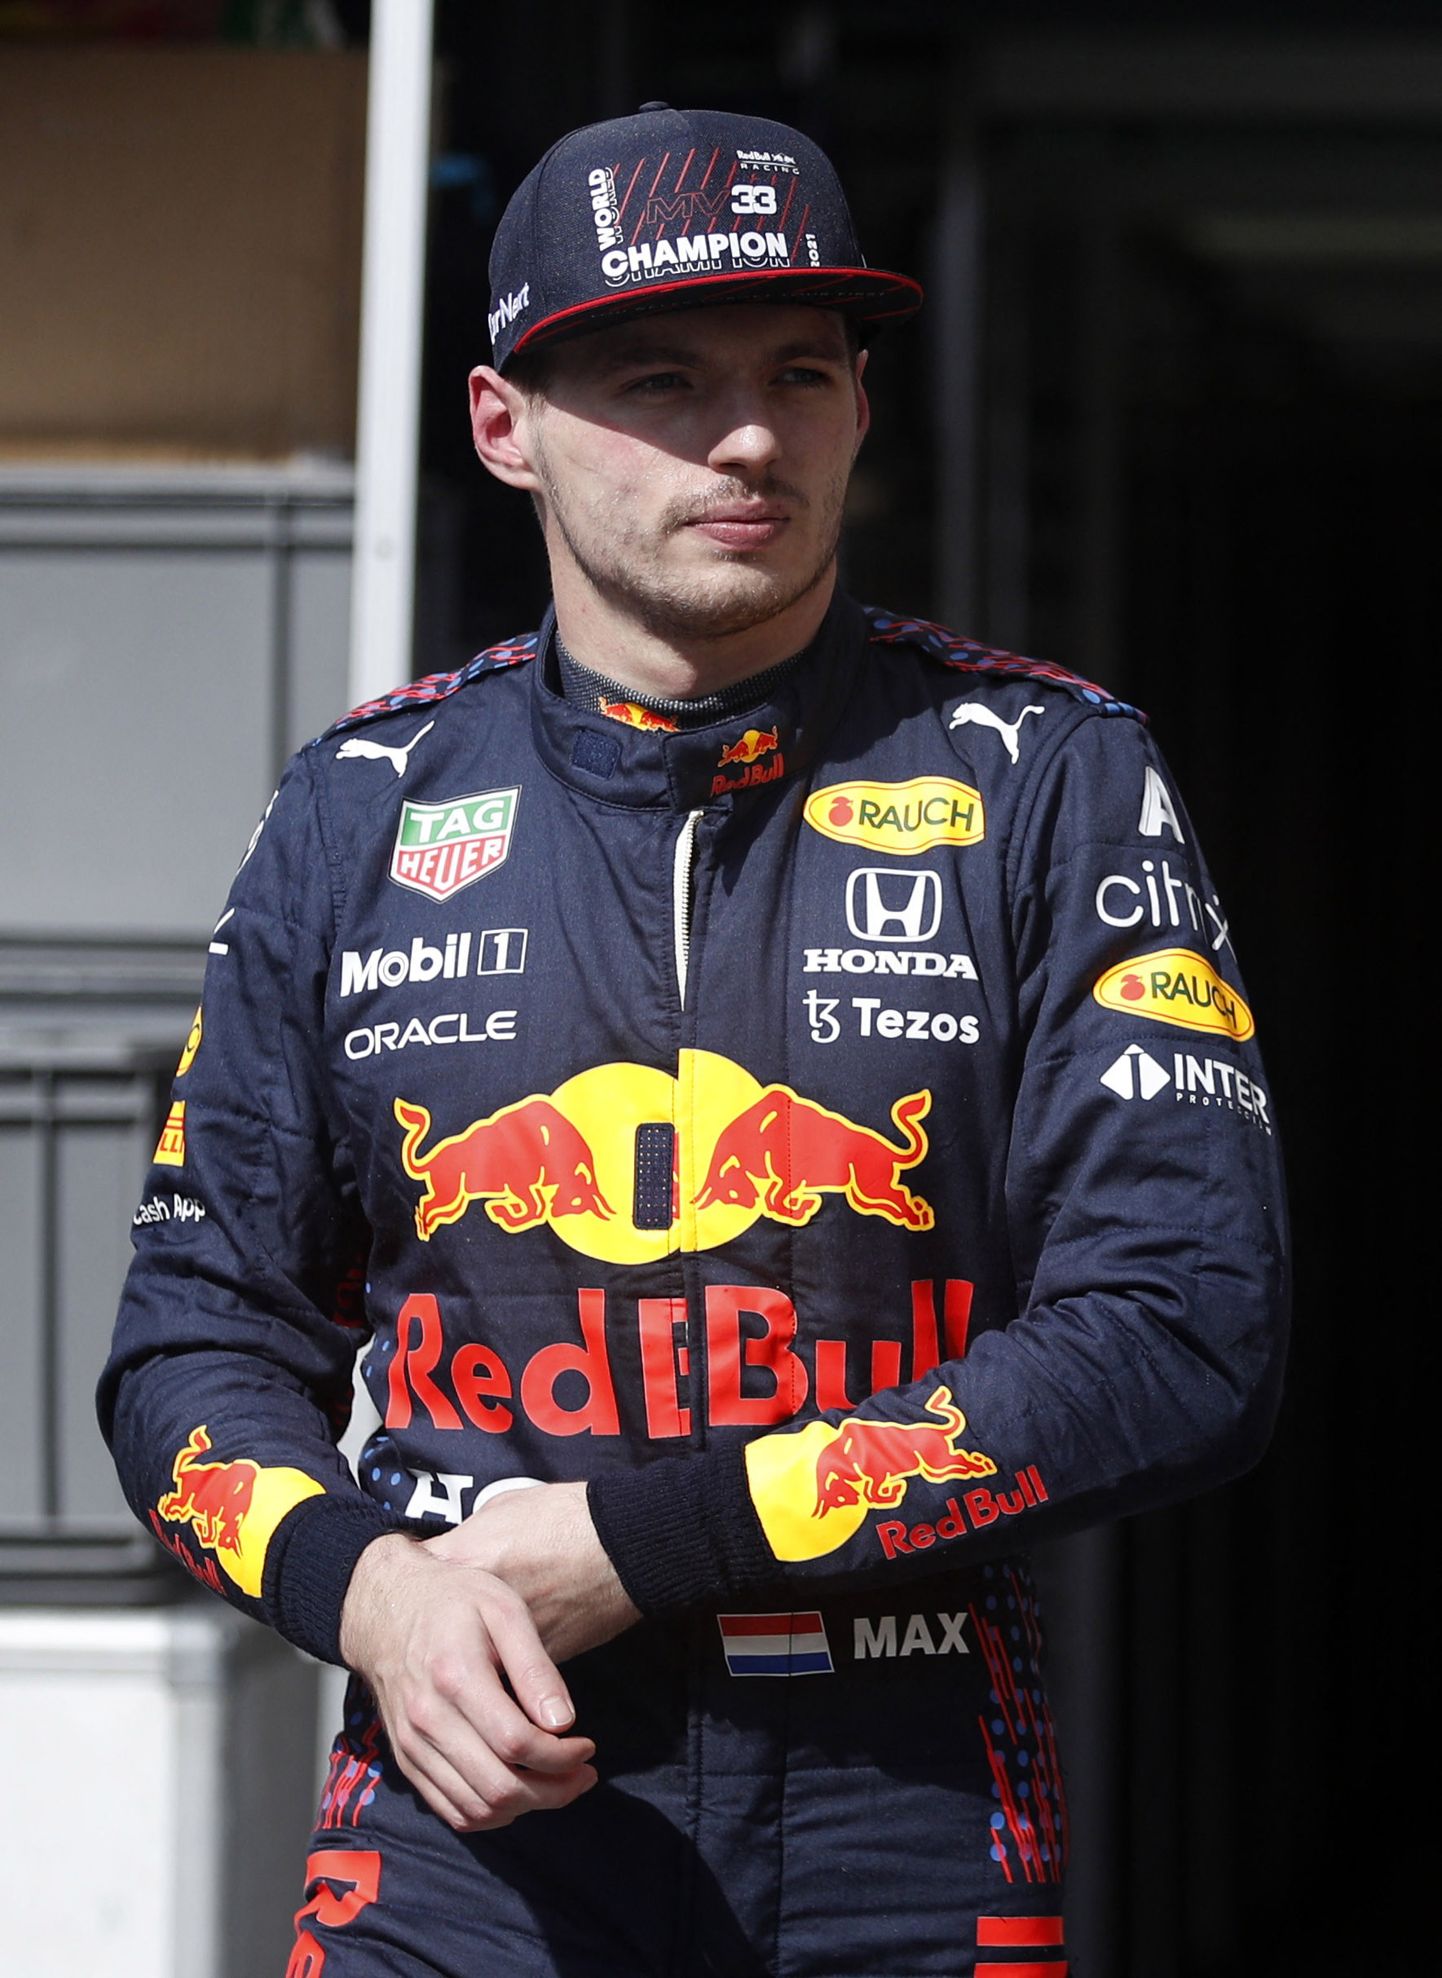 Formula One F1 - Young Driver Test - Yas Marina Circuit, Abu Dhabi, United Arab Emirates - December 14, 2021
Red Bull's Max Verstappen during testing REUTERS/Hamad I Mohammed